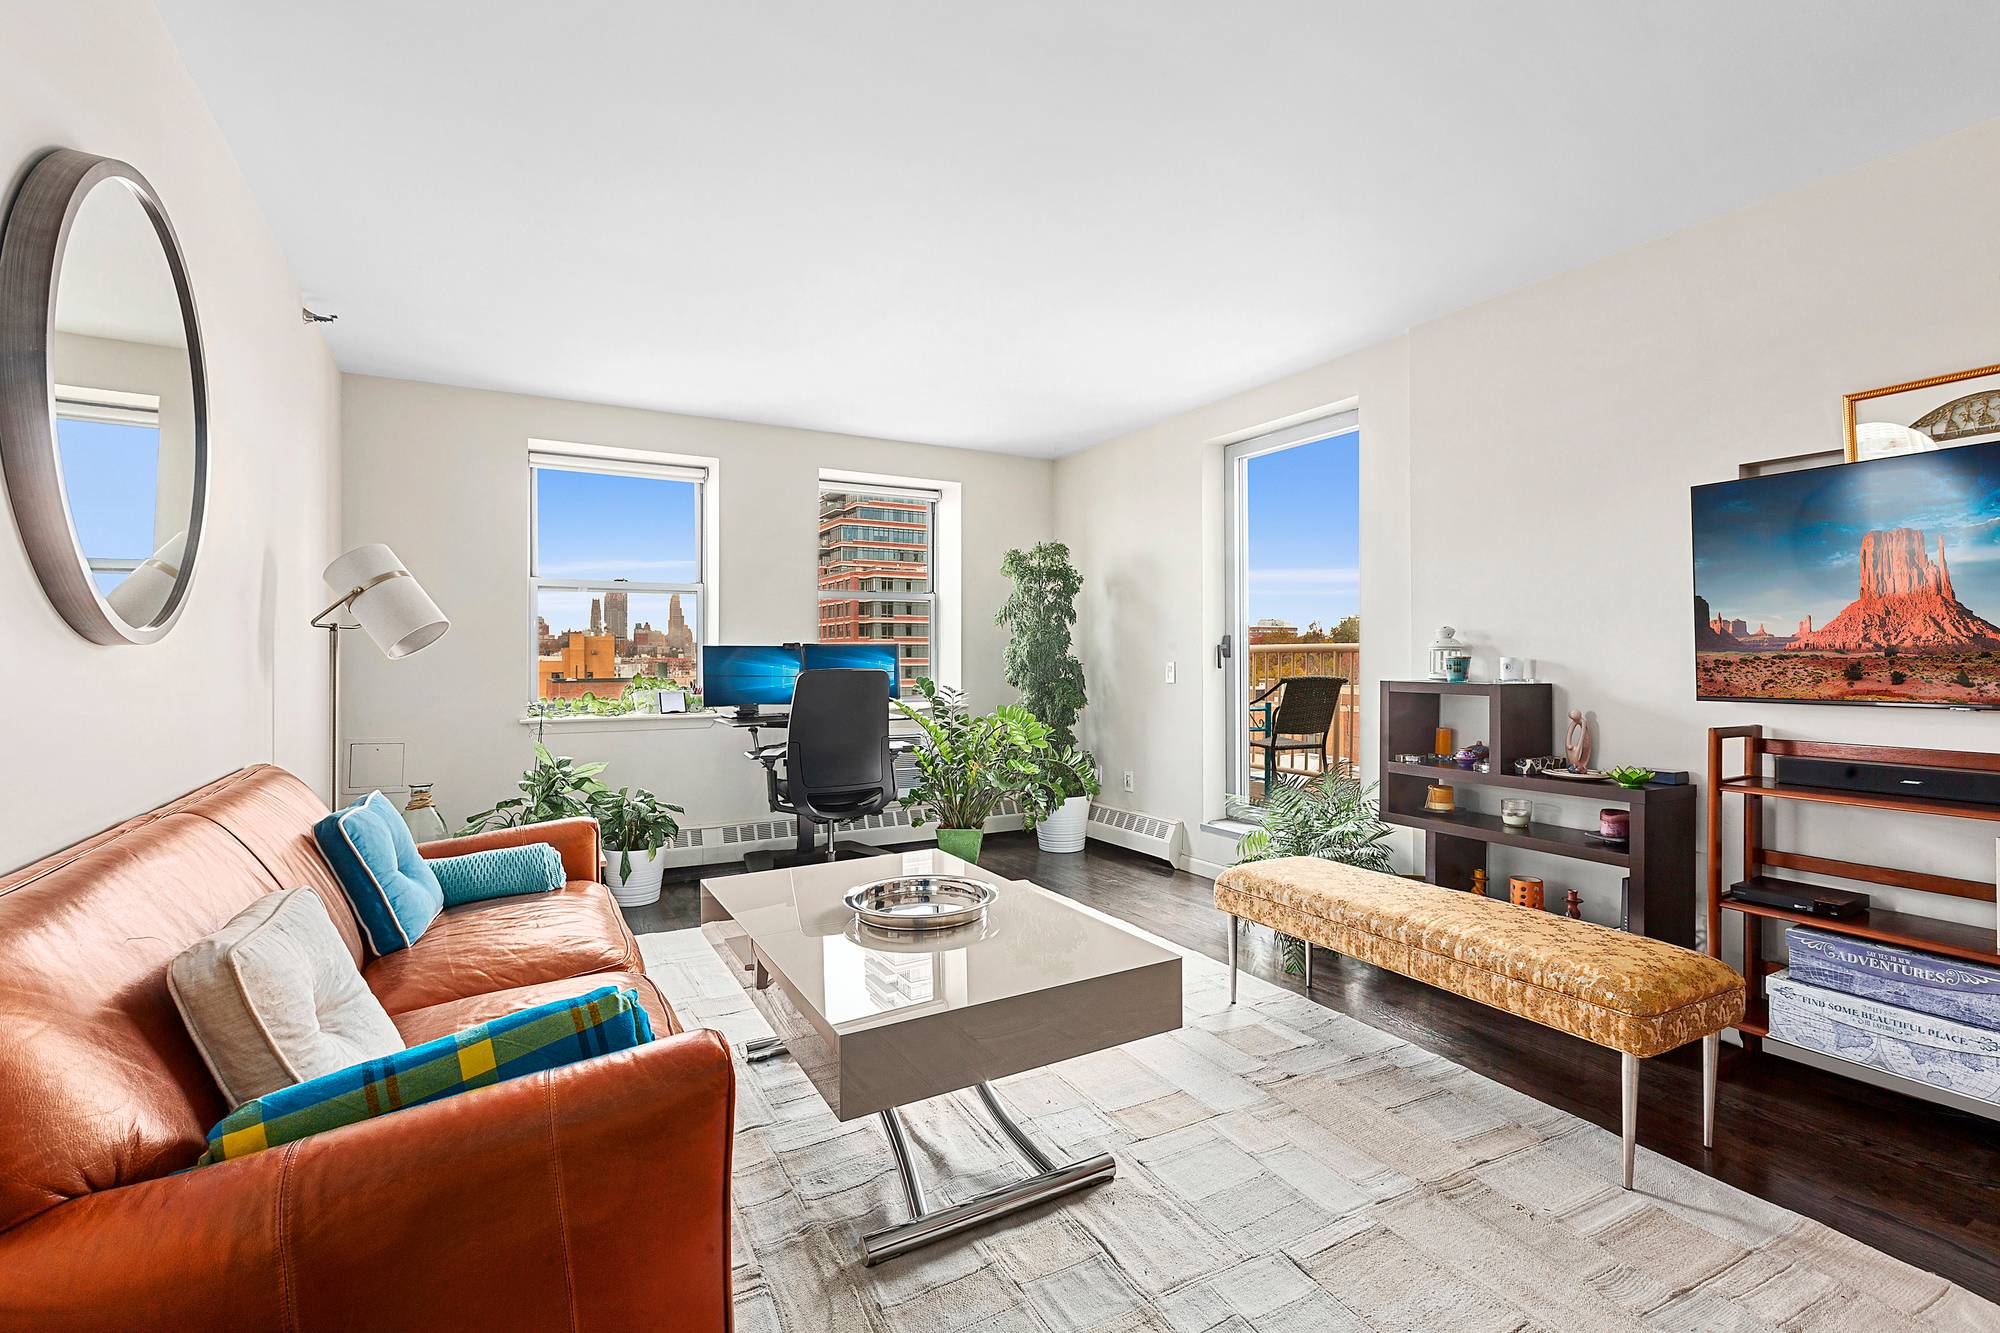 Find yourself at peace in this sunny, spacious two bedroom and two bathroom home with private outdoor space and unobstructed views in Manhattan for well under 1M.